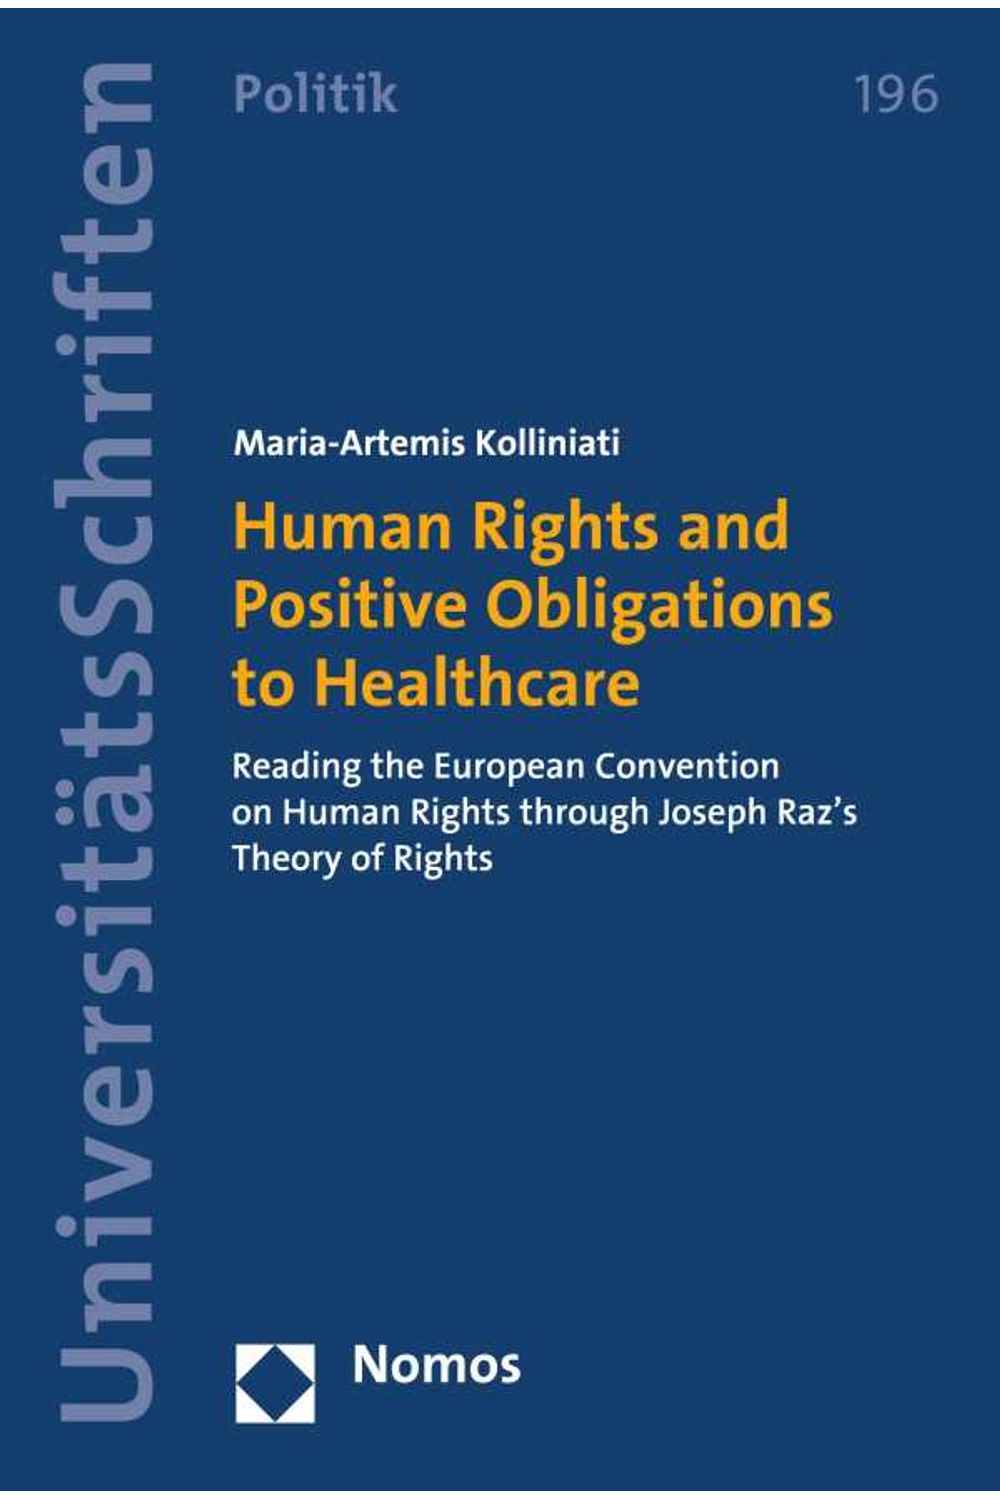 bw-human-rights-and-positive-obligations-to-healthcare-nomos-verlag-9783845299853